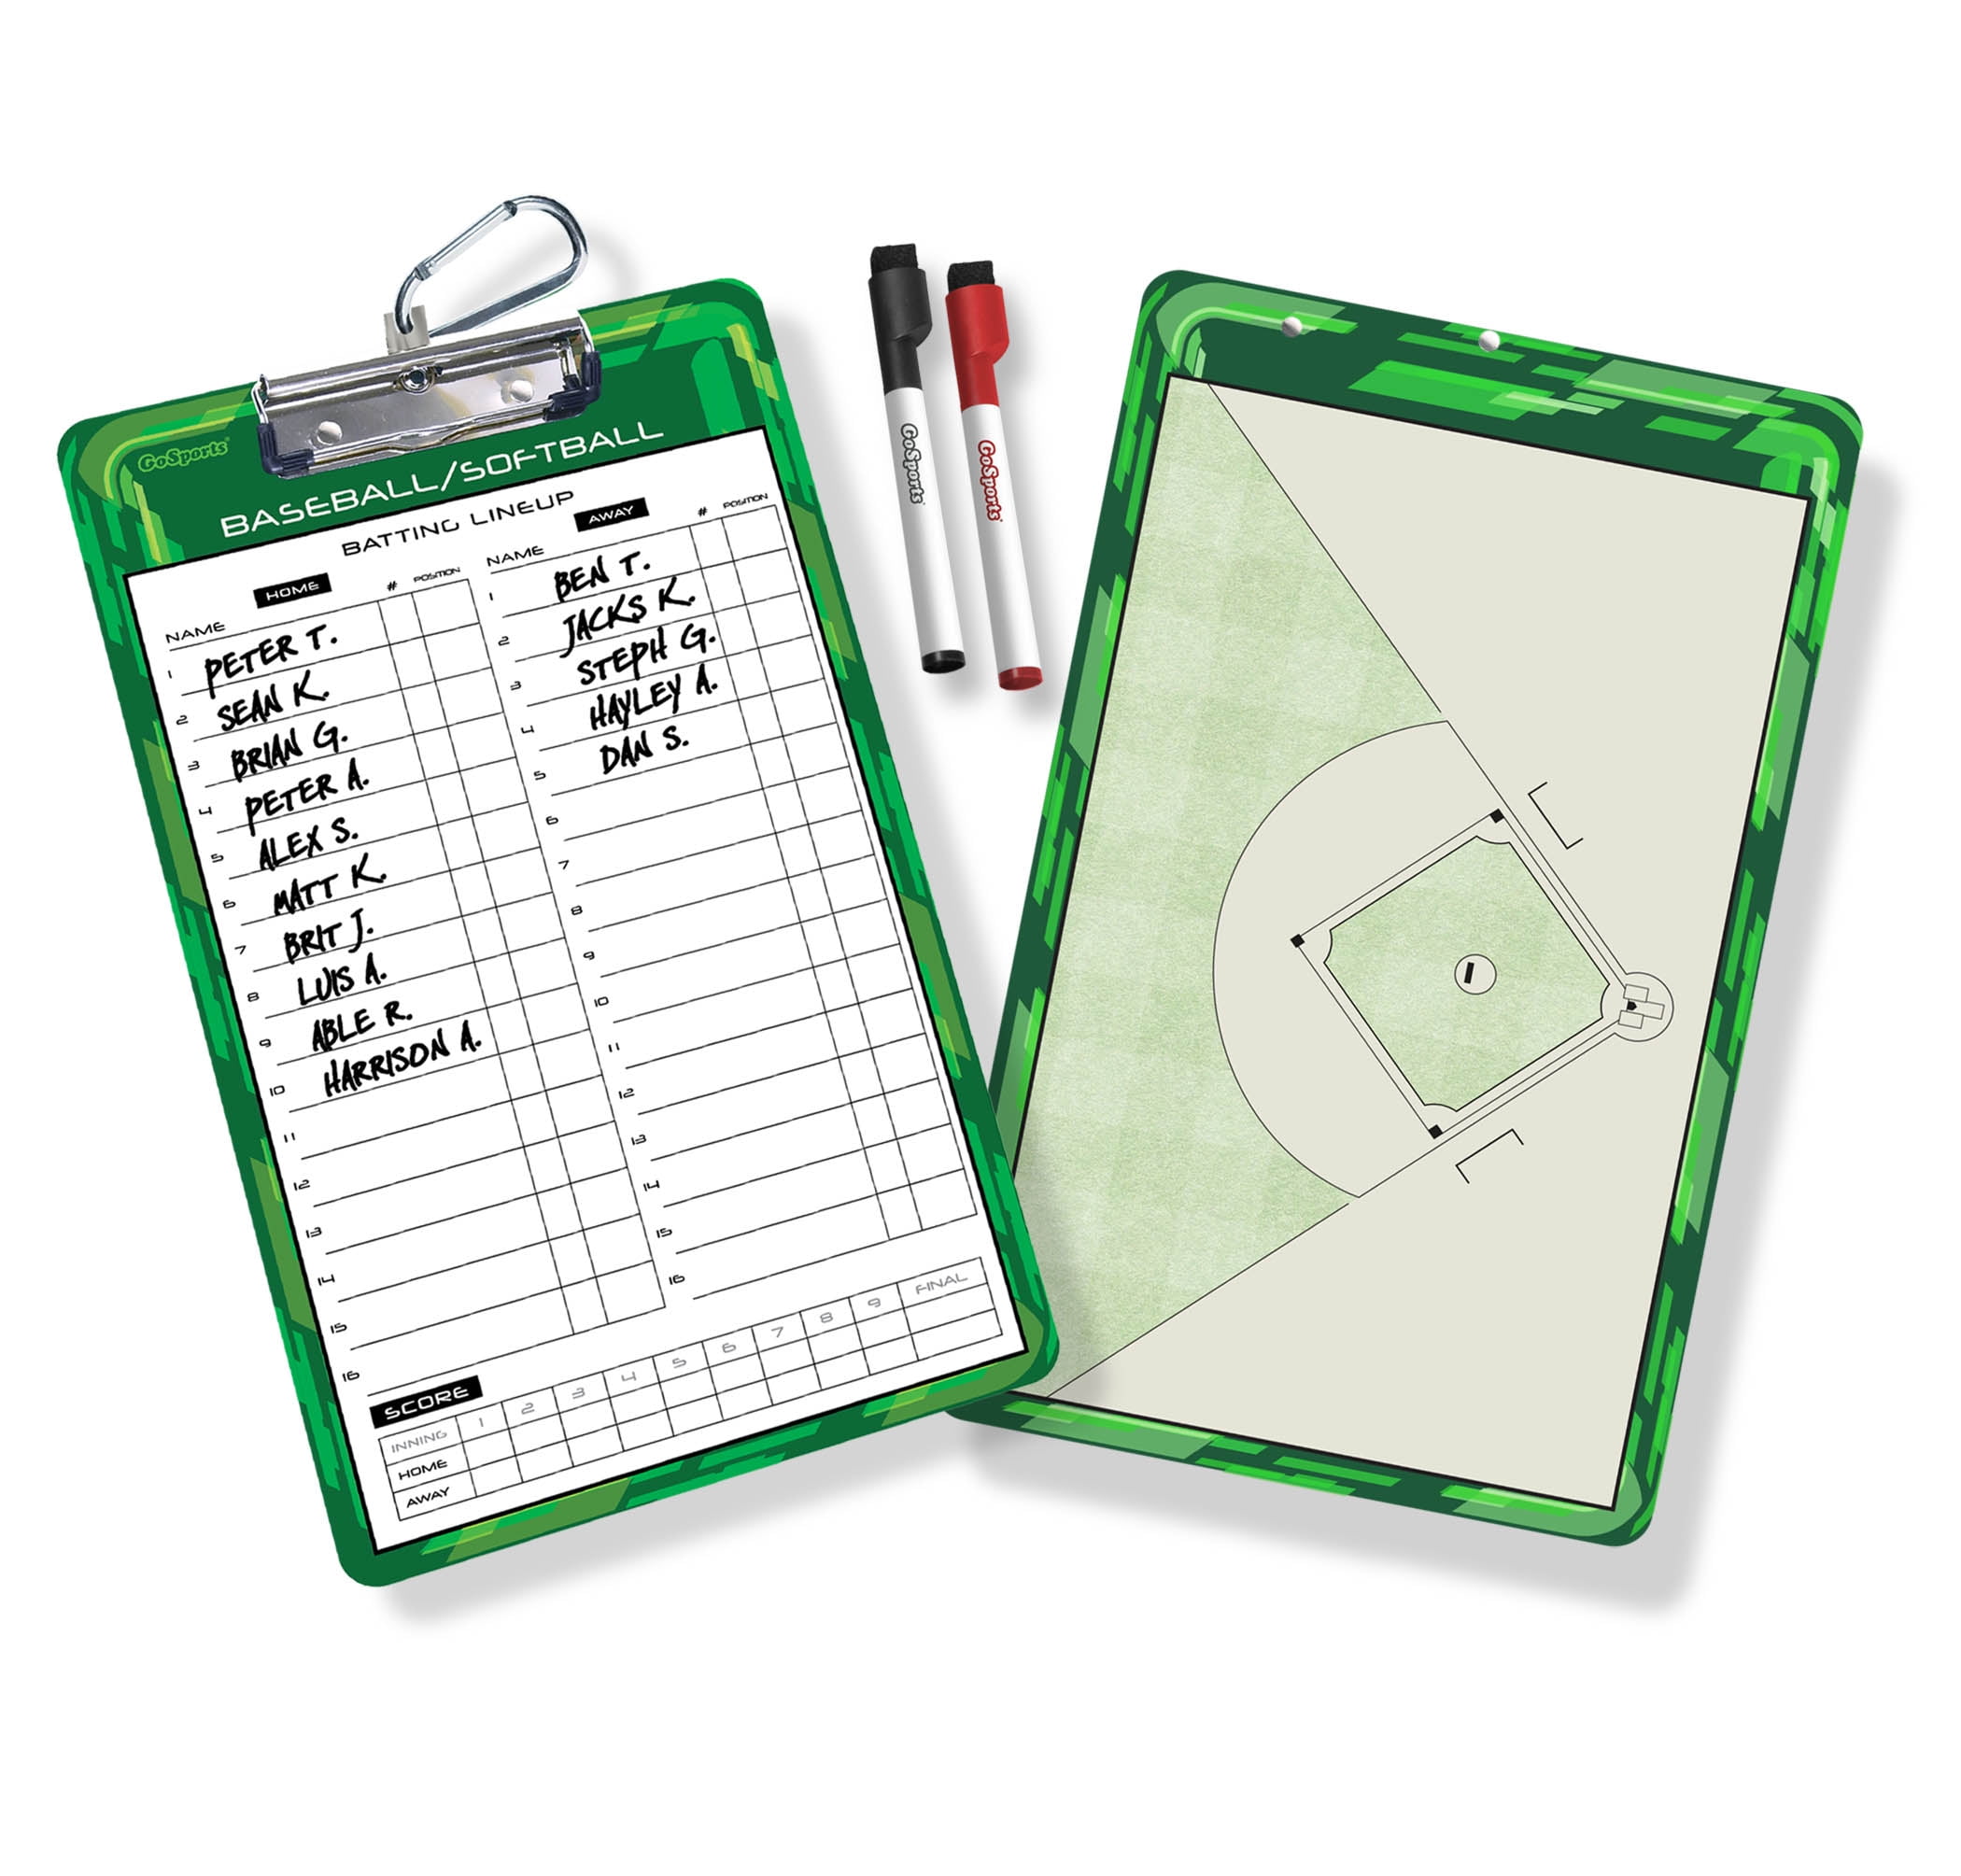 gosports-coaches-baseball-board-2-sided-dry-erase-w-batting-lineup-and